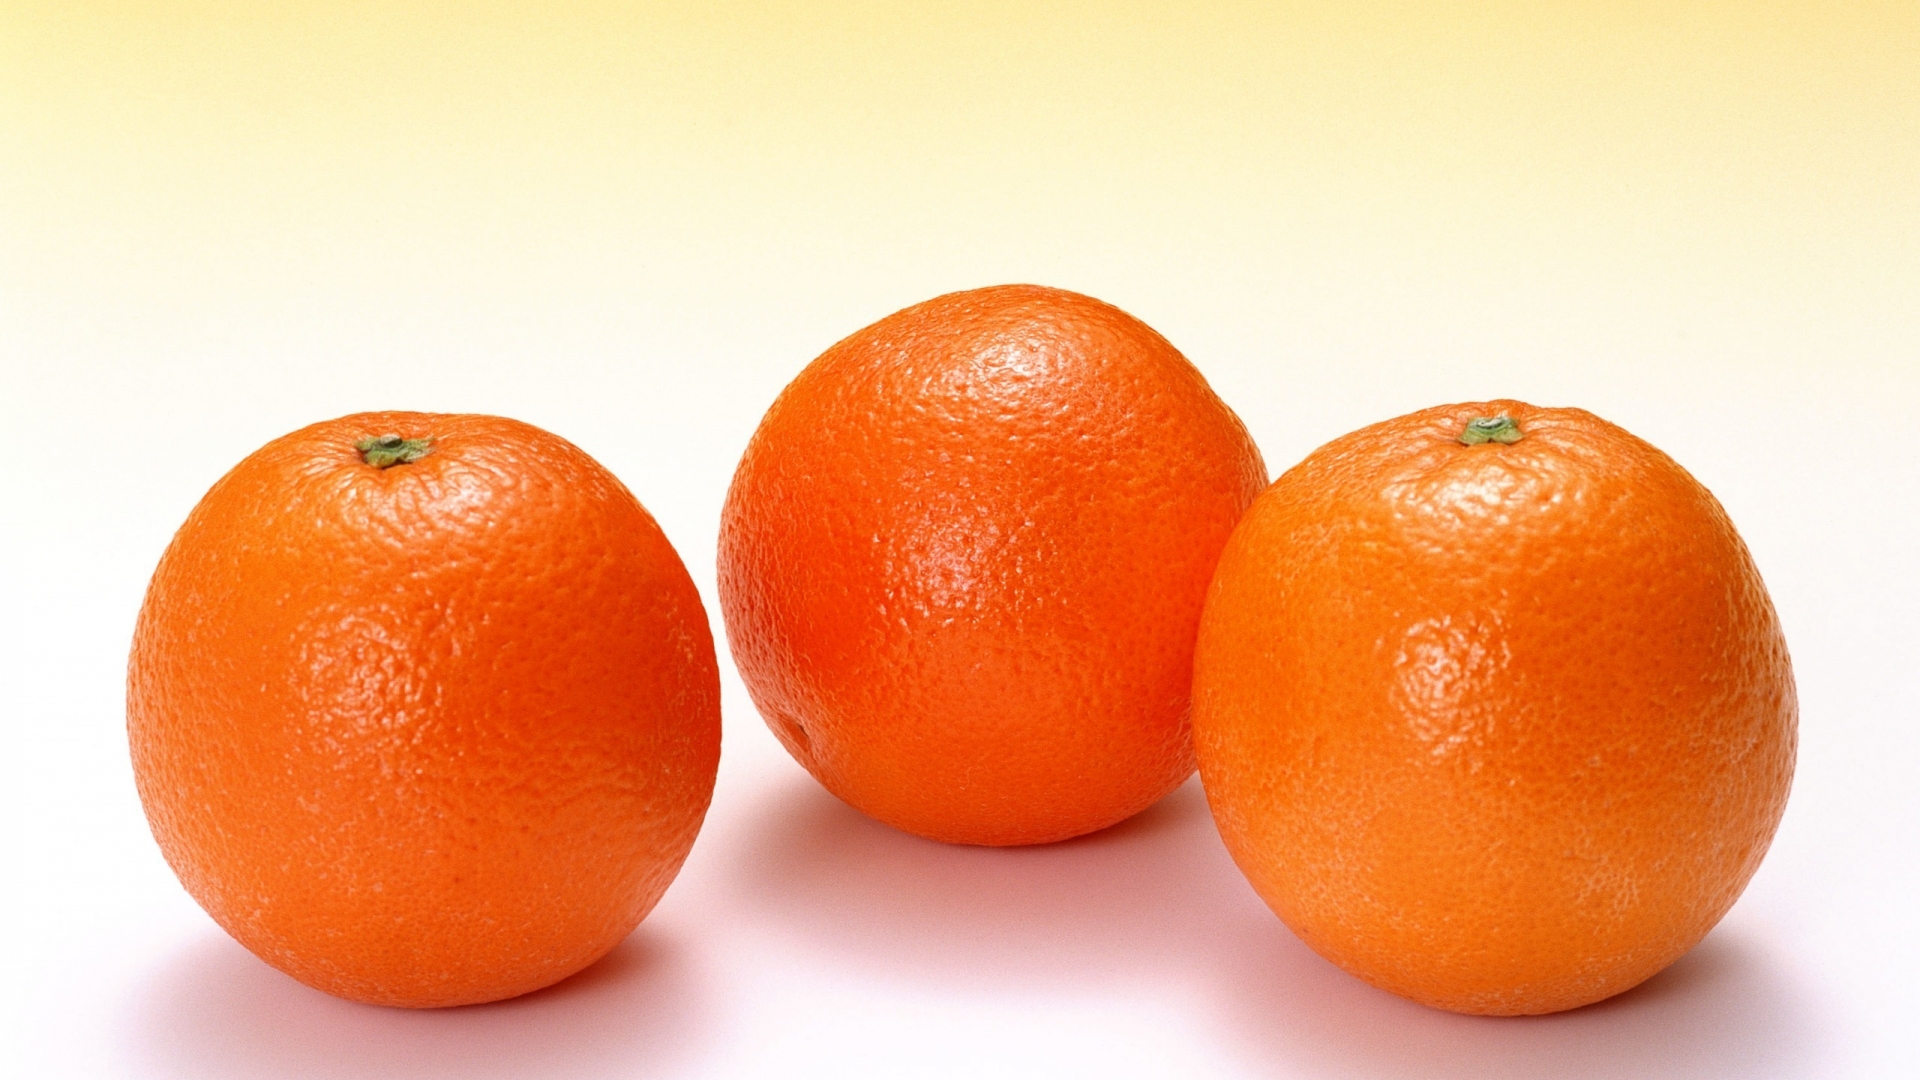 Juicy Oranges for 1920 x 1080 HDTV 1080p resolution